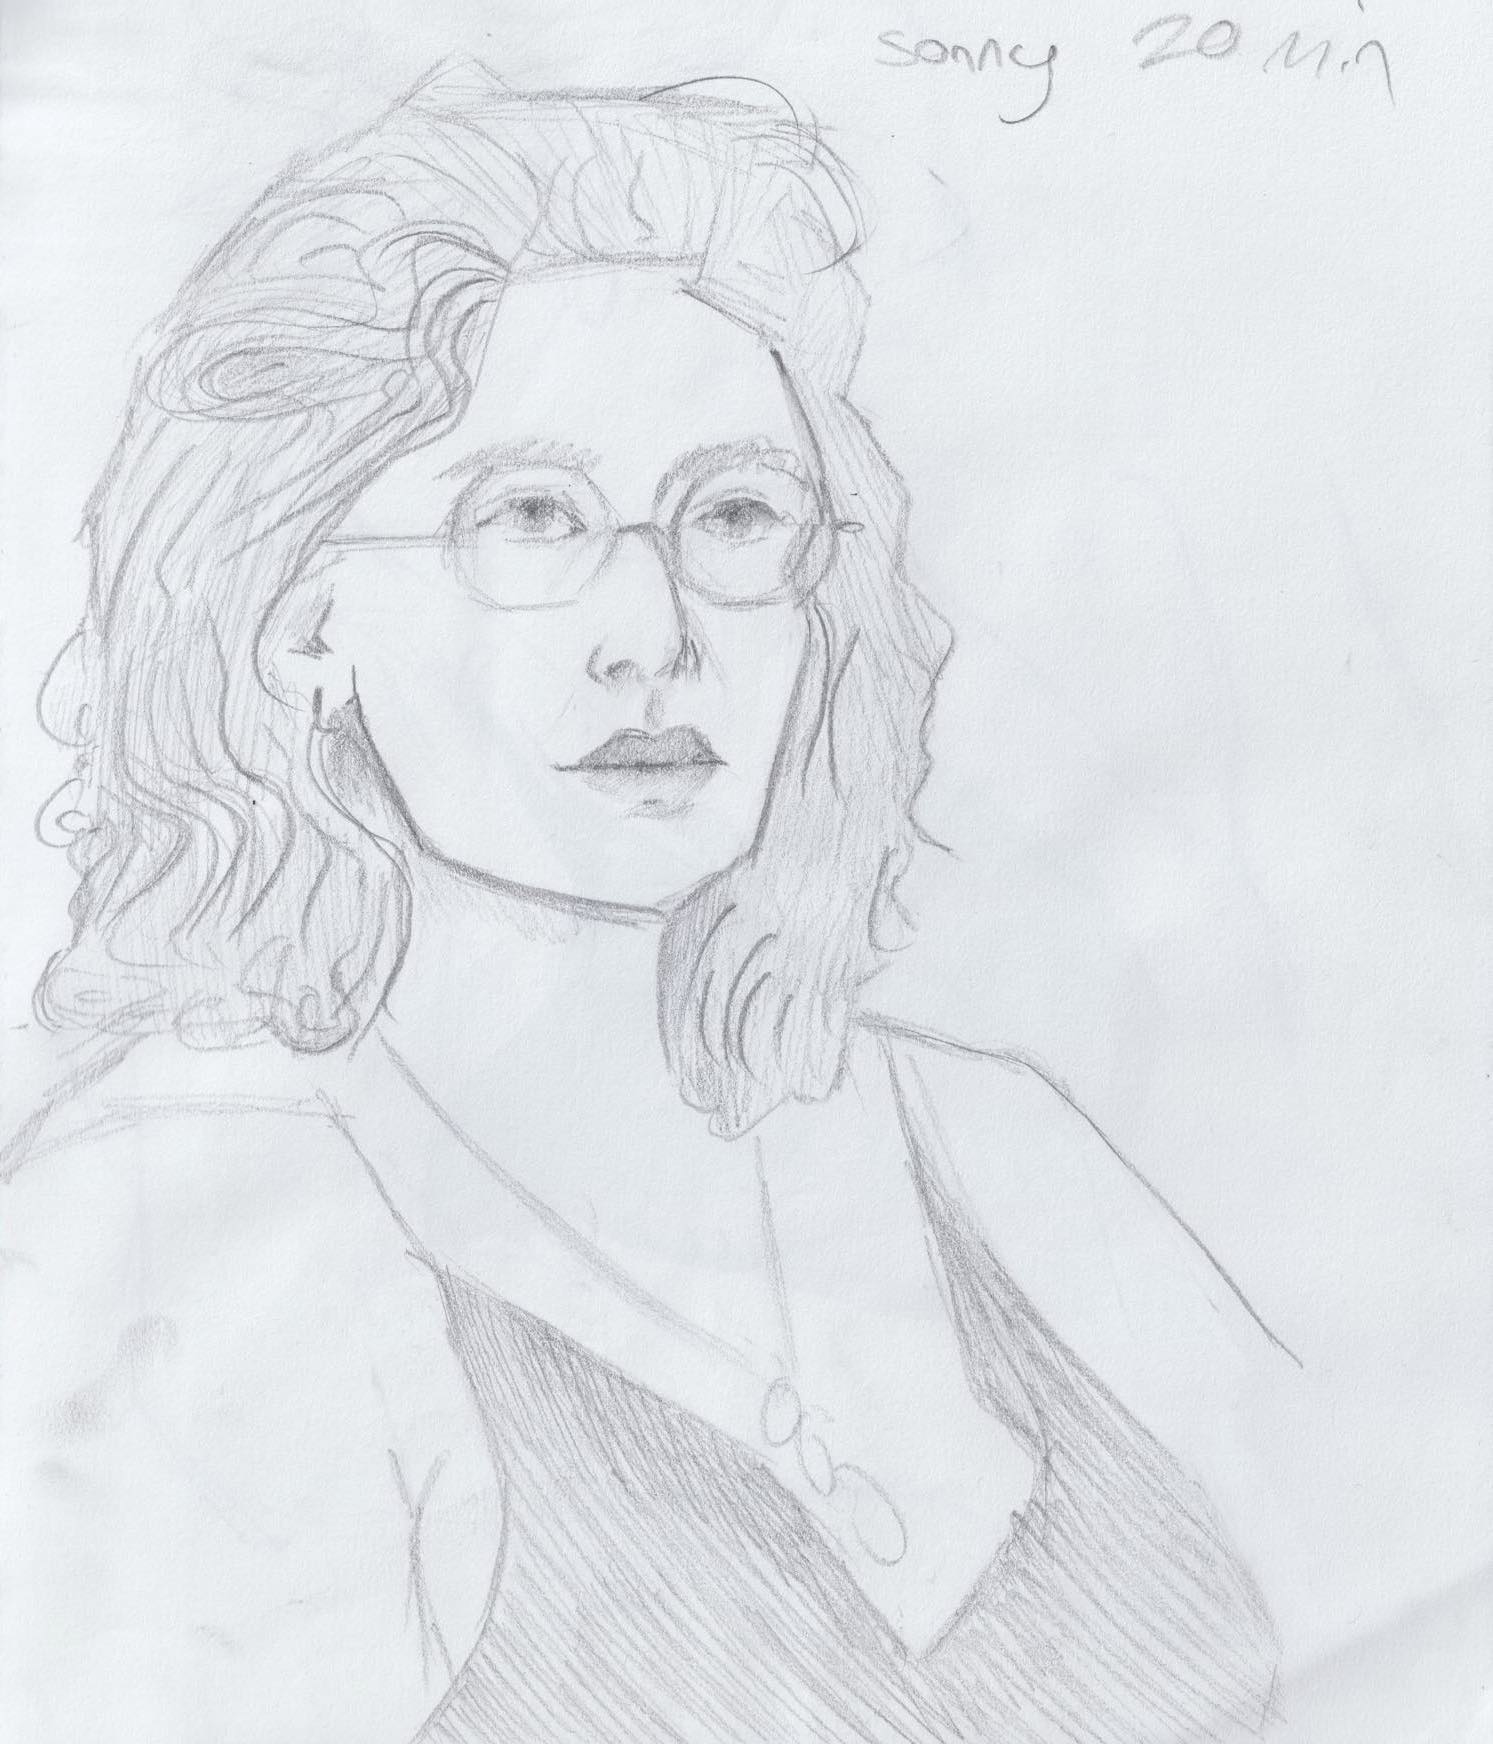 Life drawing in pencil of woman with glasses